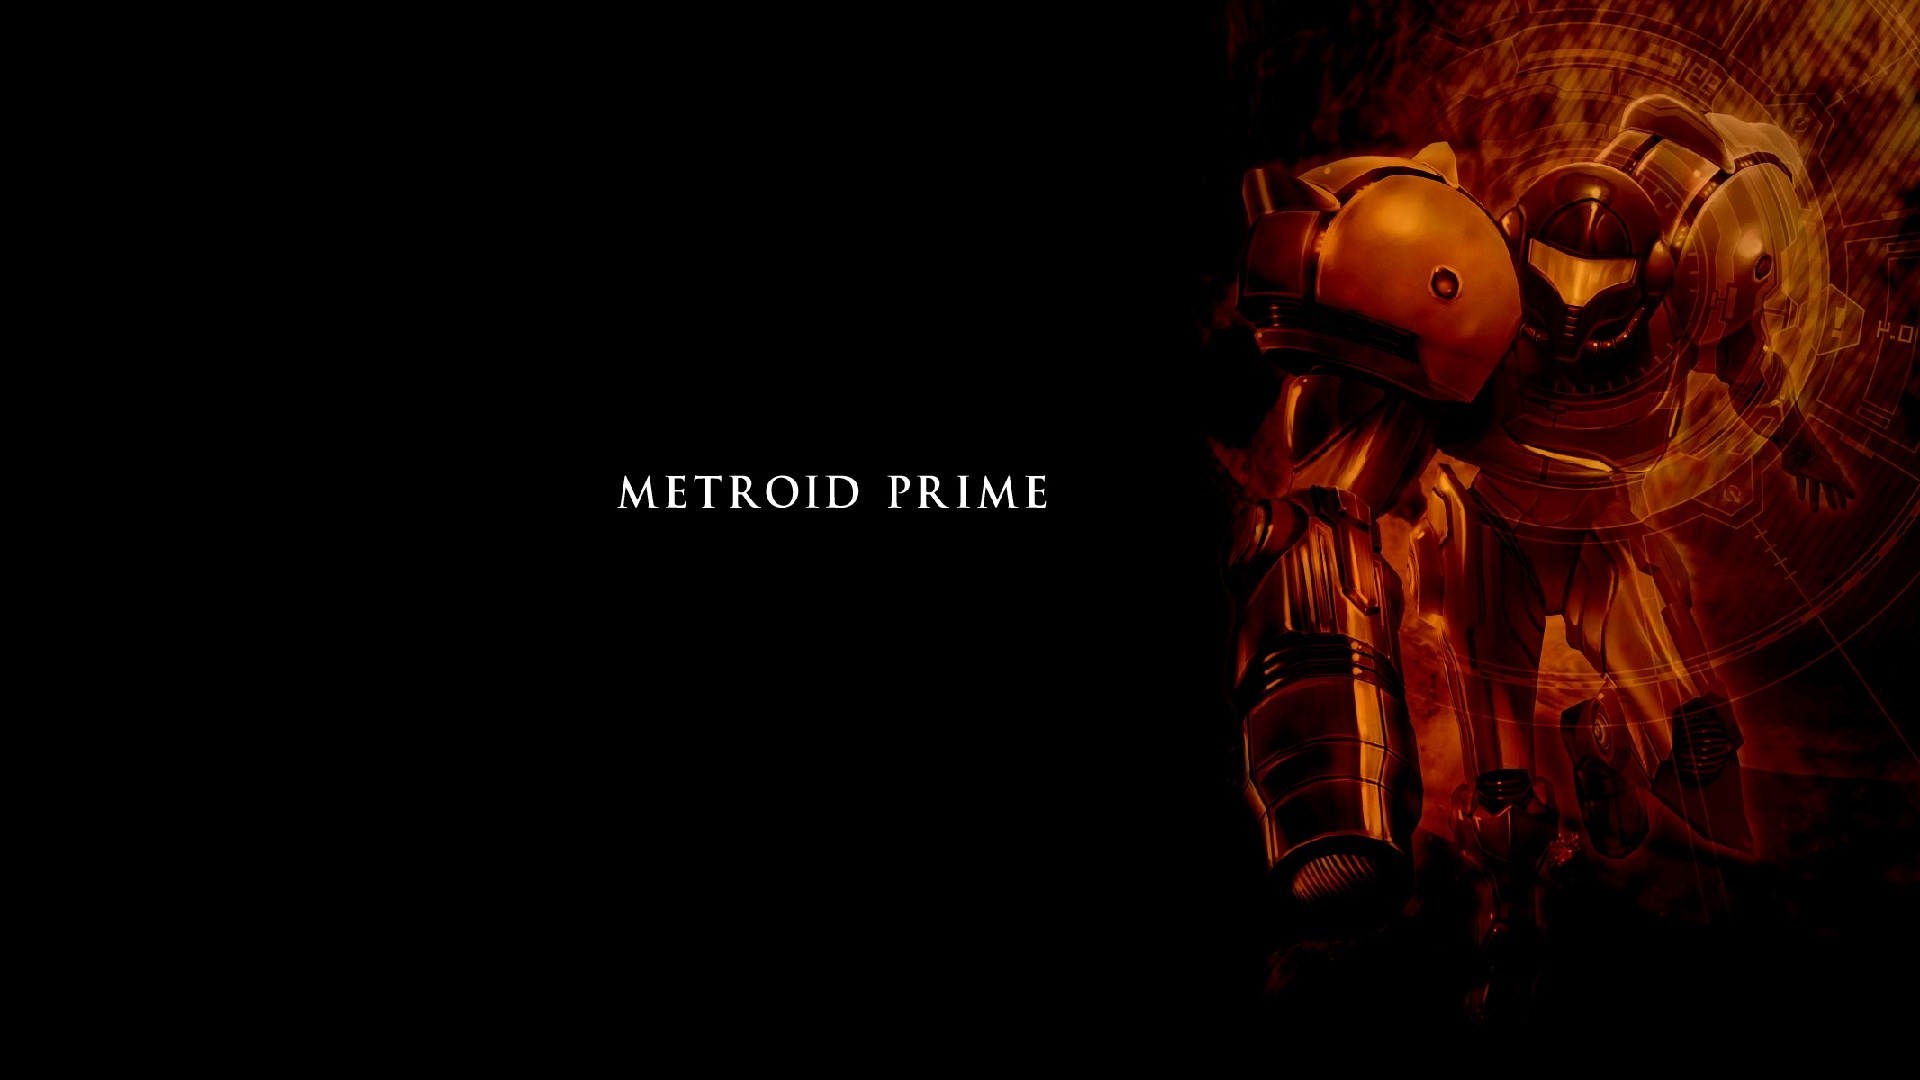 1920x1080 free wallpaper and screensavers for metroid prime,  (157 kB)